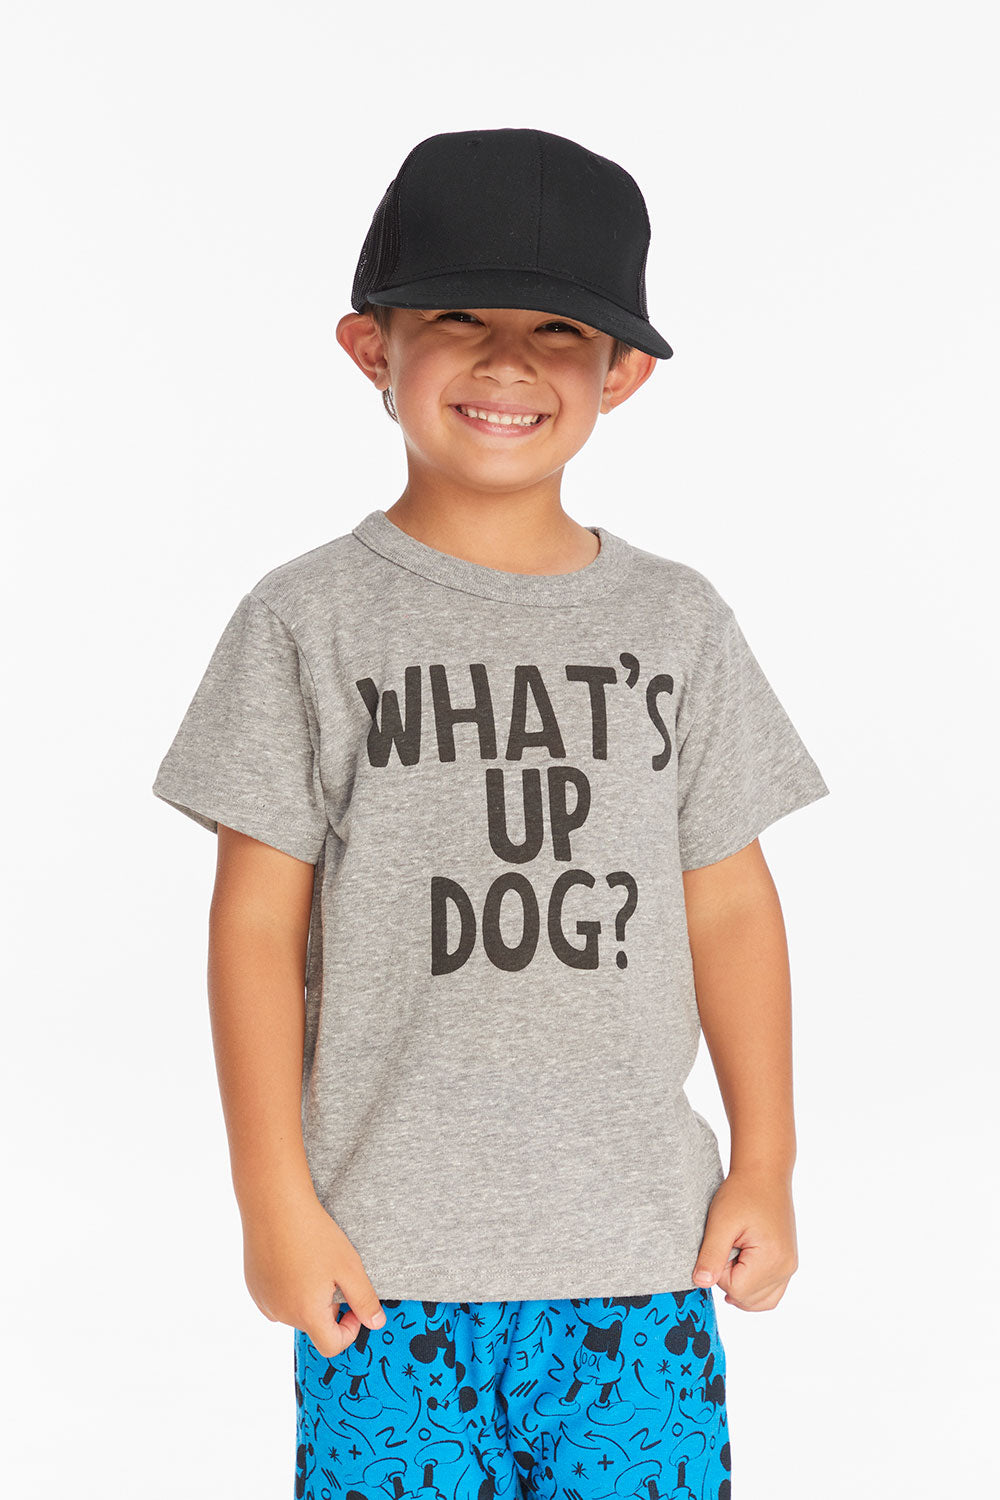 What's Up Dog Boys Crew Neck Tee Boys chaserbrand